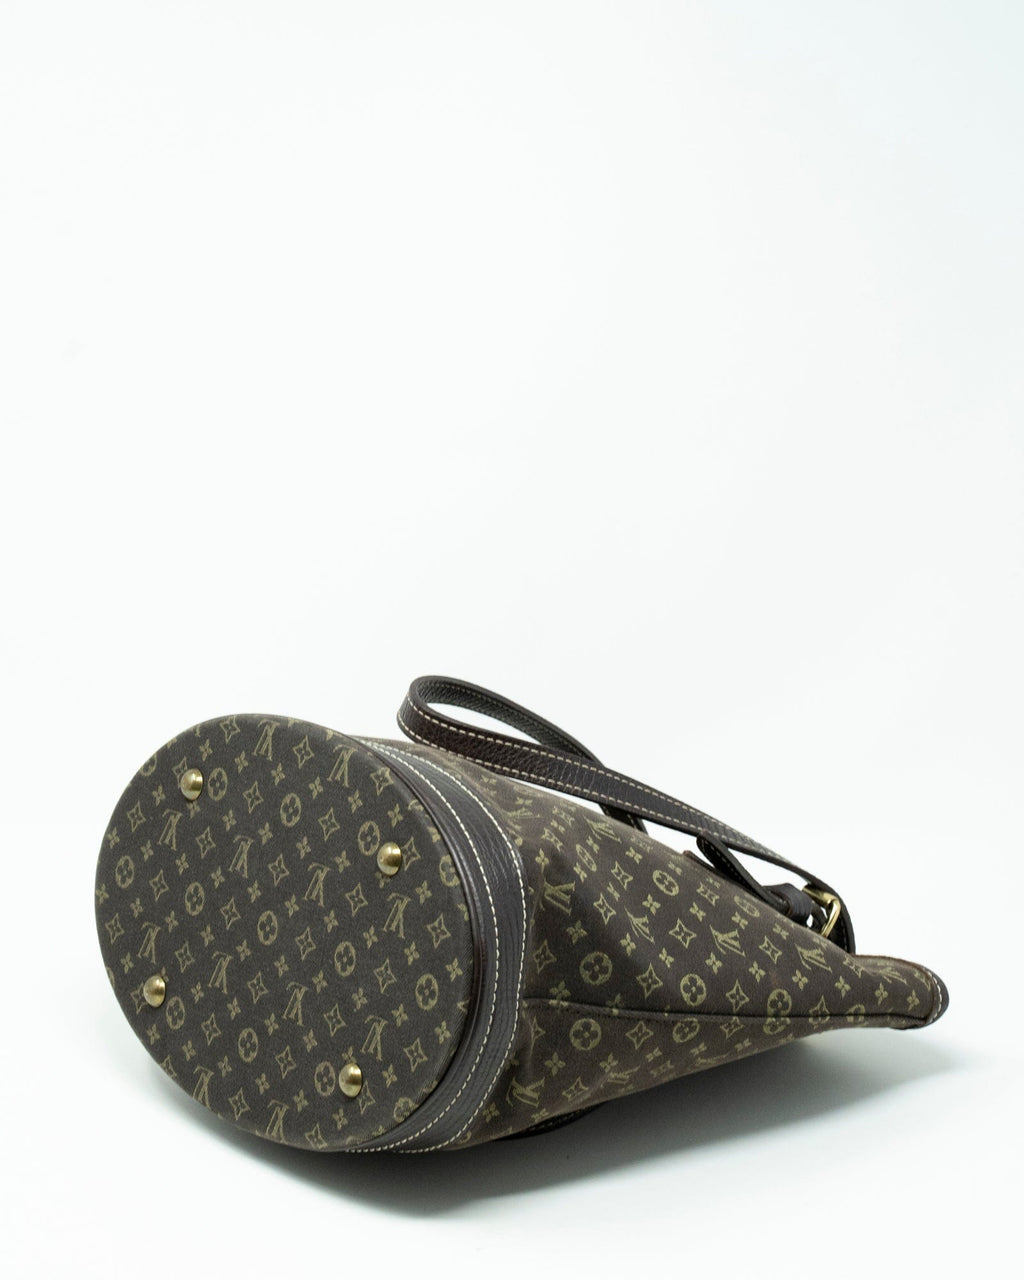 LV Monogram Mini Lin Bucket (With Pouch)_Louis Vuitton_BRANDS_MILAN CLASSIC  Luxury Trade Company Since 2007